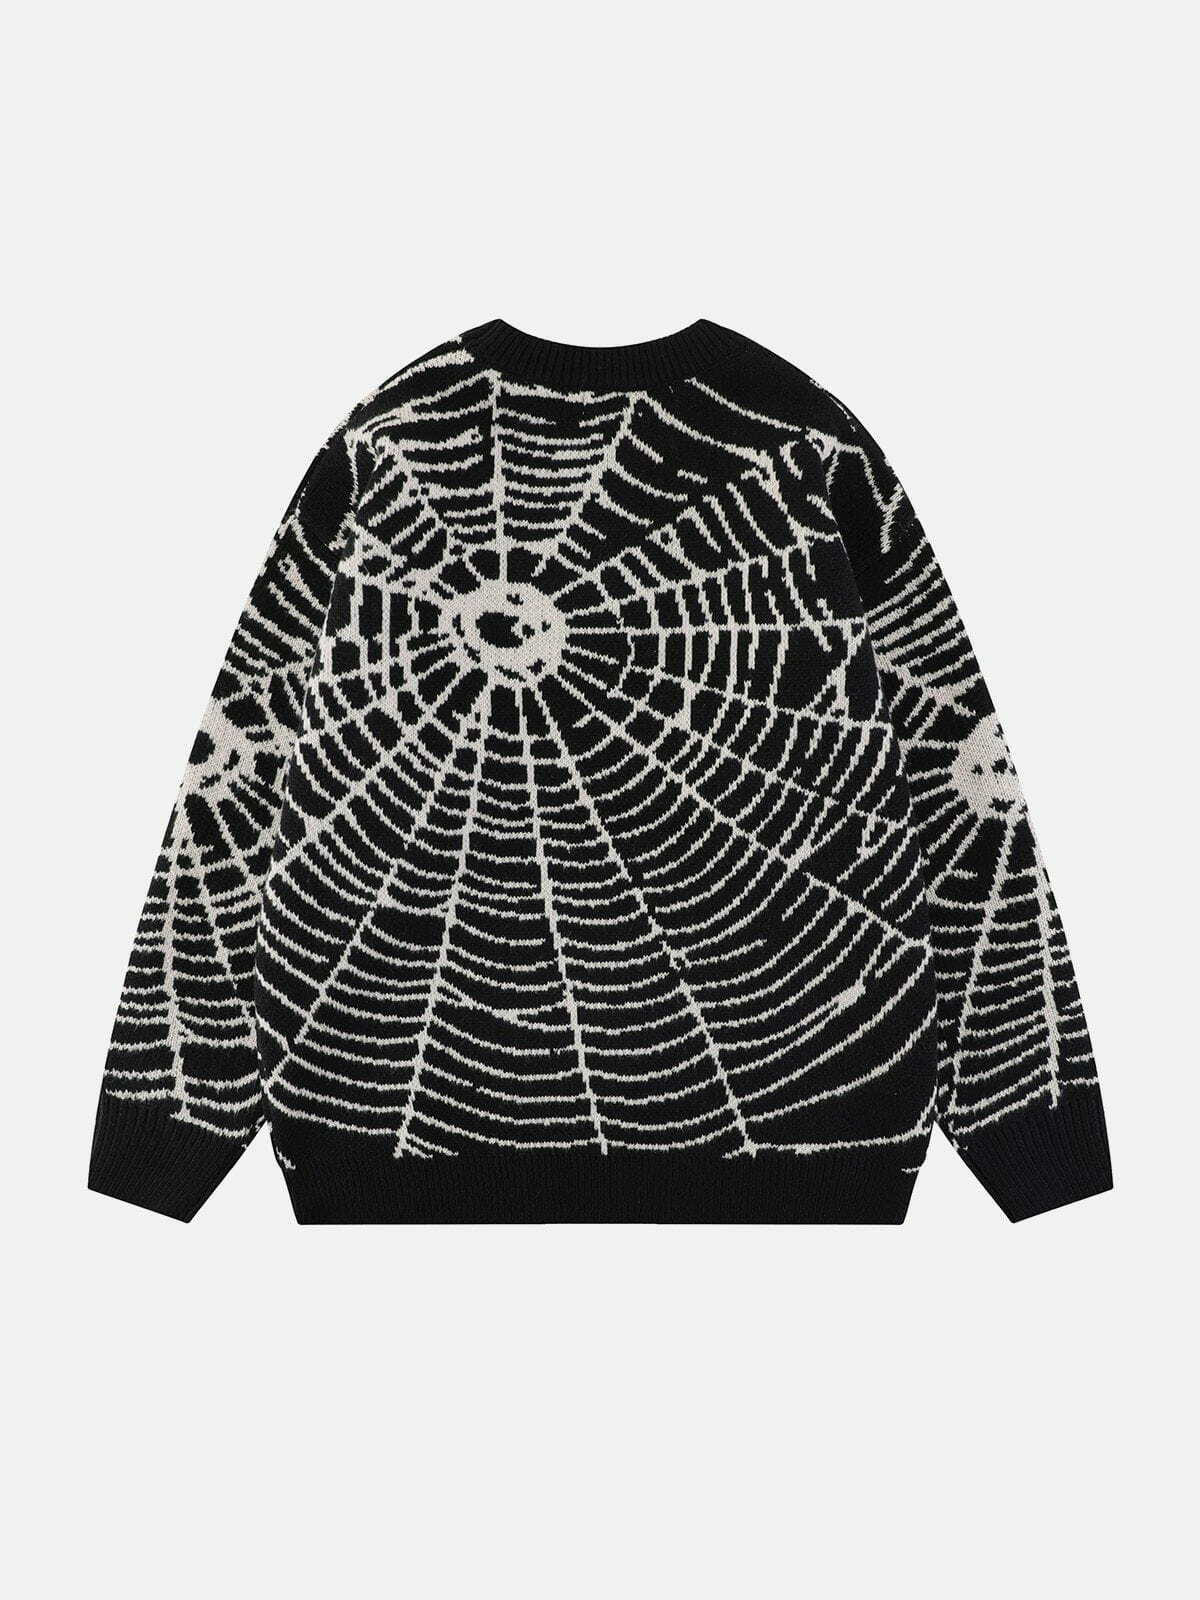 knit spider web sweater edgy streetwear chic 8542